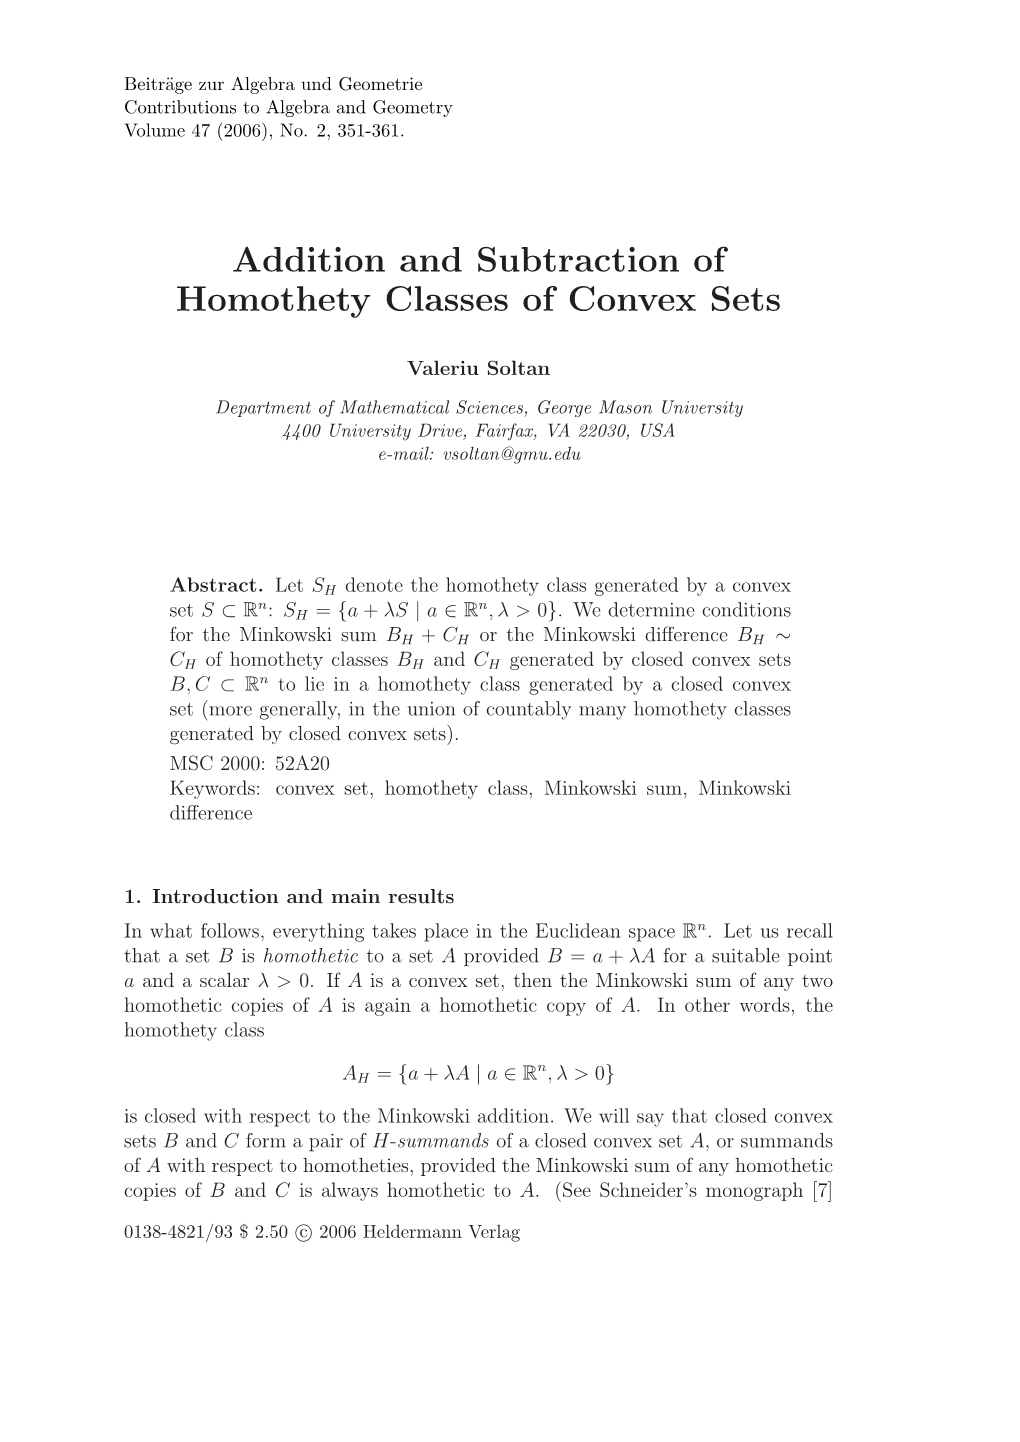 Addition and Subtraction of Homothety Classes of Convex Sets